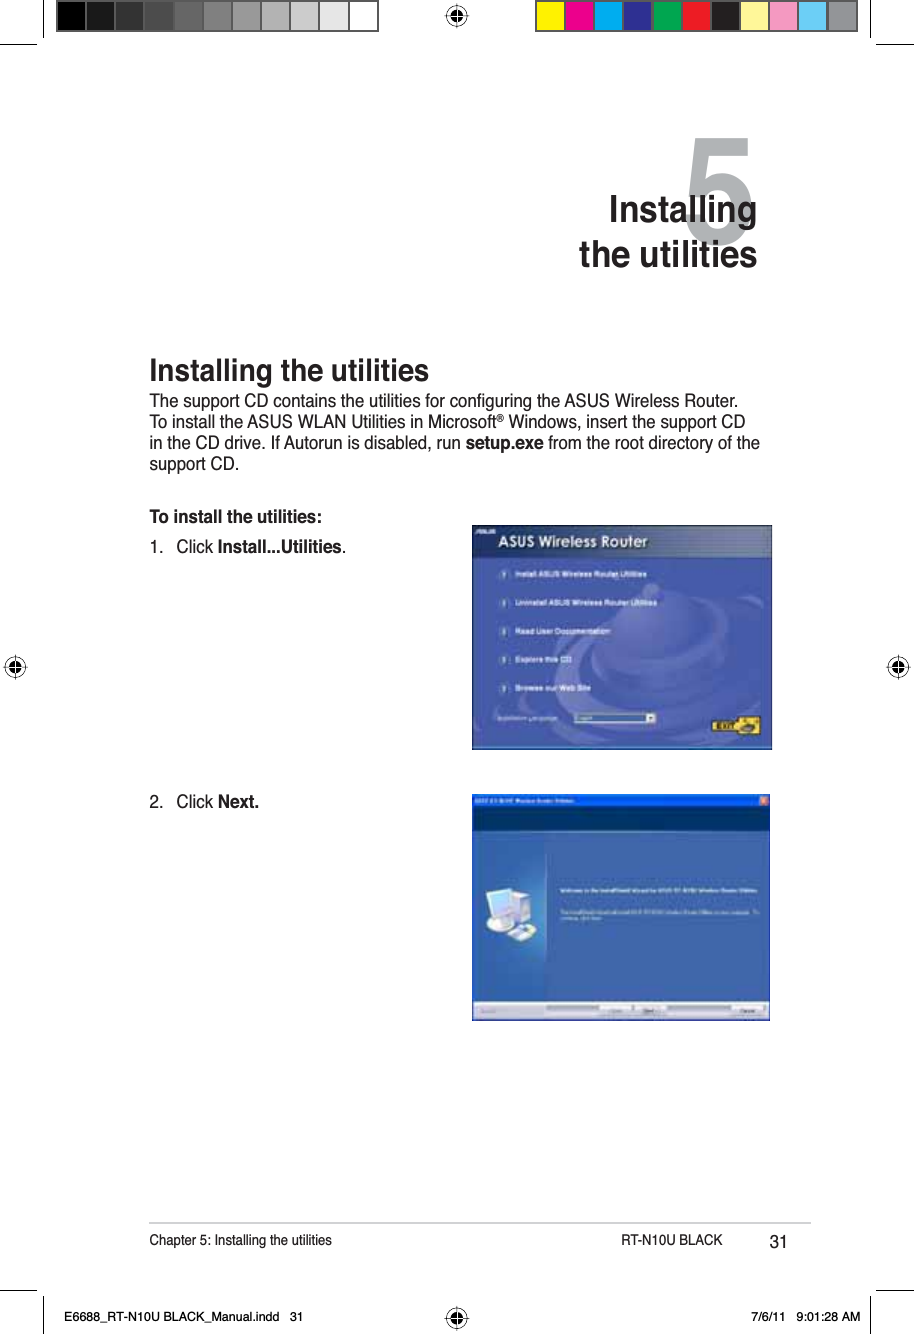 31Chapter 5: Installing the utilities          RT-N10U BLACK5Installingthe utilities2. Click Next.Installing the utilities7KHVXSSRUW&amp;&apos;FRQWDLQVWKHXWLOLWLHVIRUFRQÀJXULQJWKH$686:LUHOHVV5RXWHUTo install the ASUS WLAN Utilities in Microsoft® Windows, insert the support CD in the CD drive. If Autorun is disabled, run setup.exe from the root directory of the support CD.To install the utilities: 1. Click Install...Utilities.E6688_RT-N10U BLACK_Manual.indd   31 7/6/11   9:01:28 AM